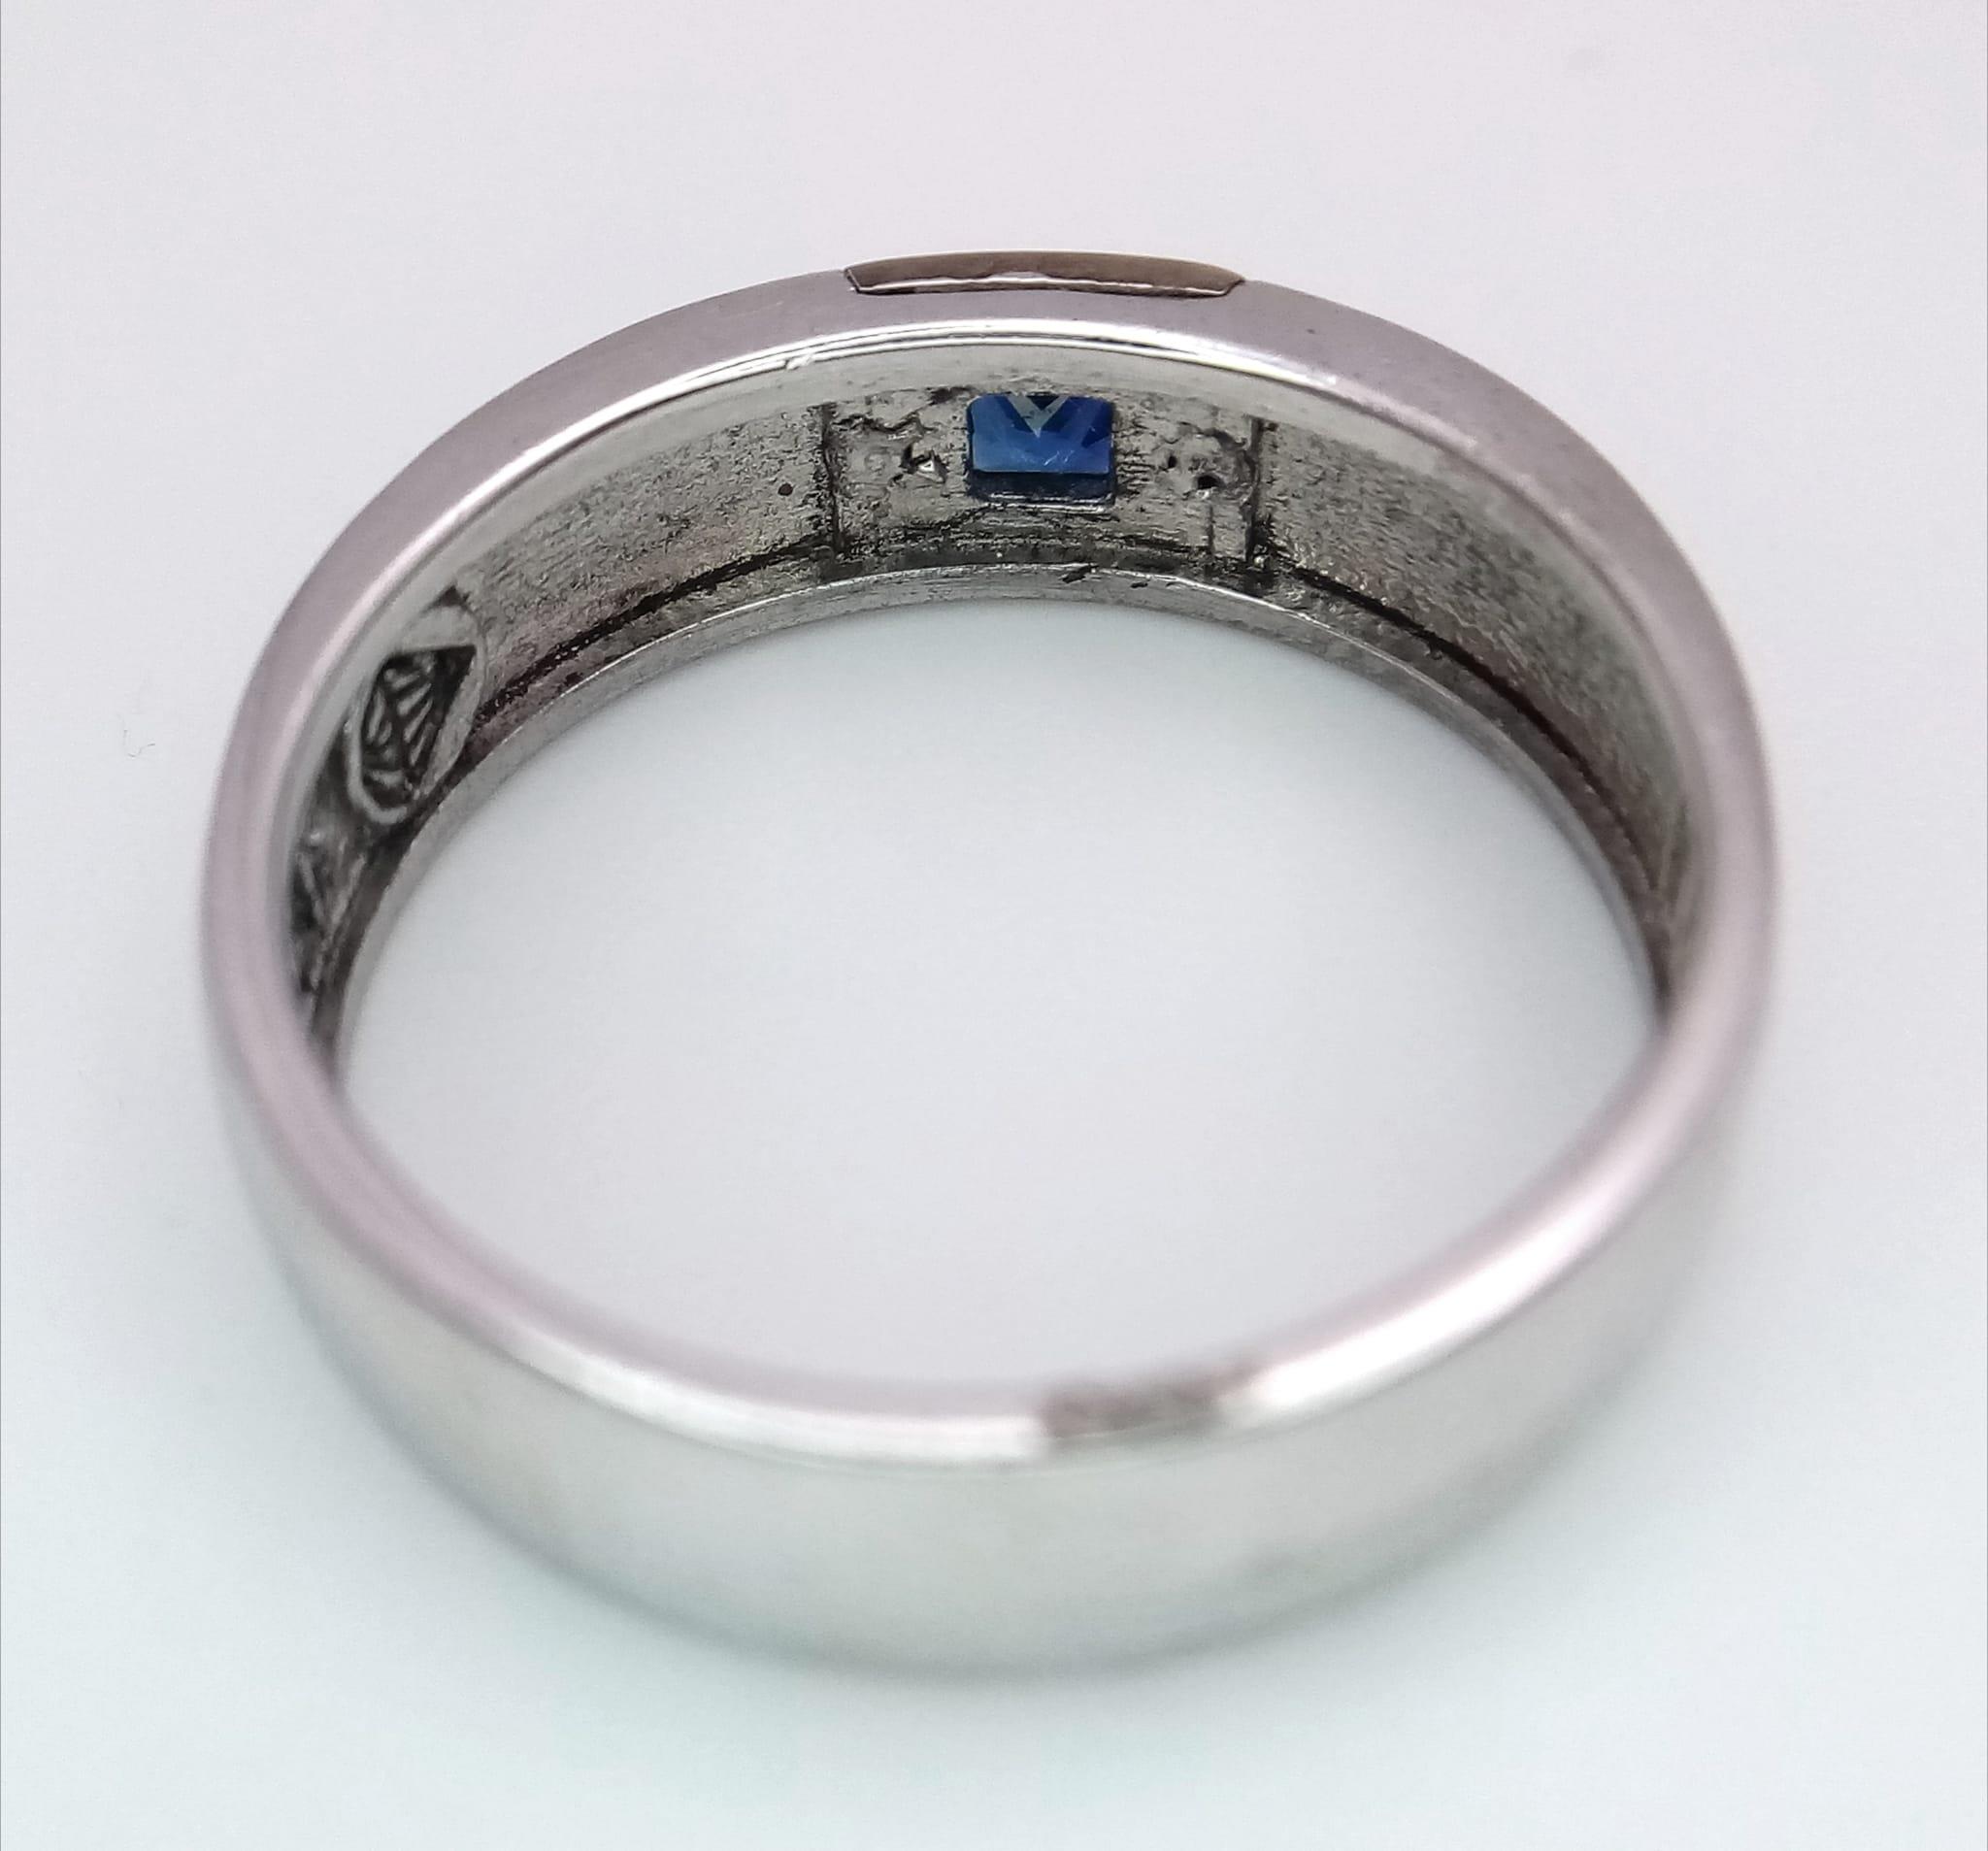 A 925 Silver Blue Stone Gents Ring. Size U. - Image 7 of 9